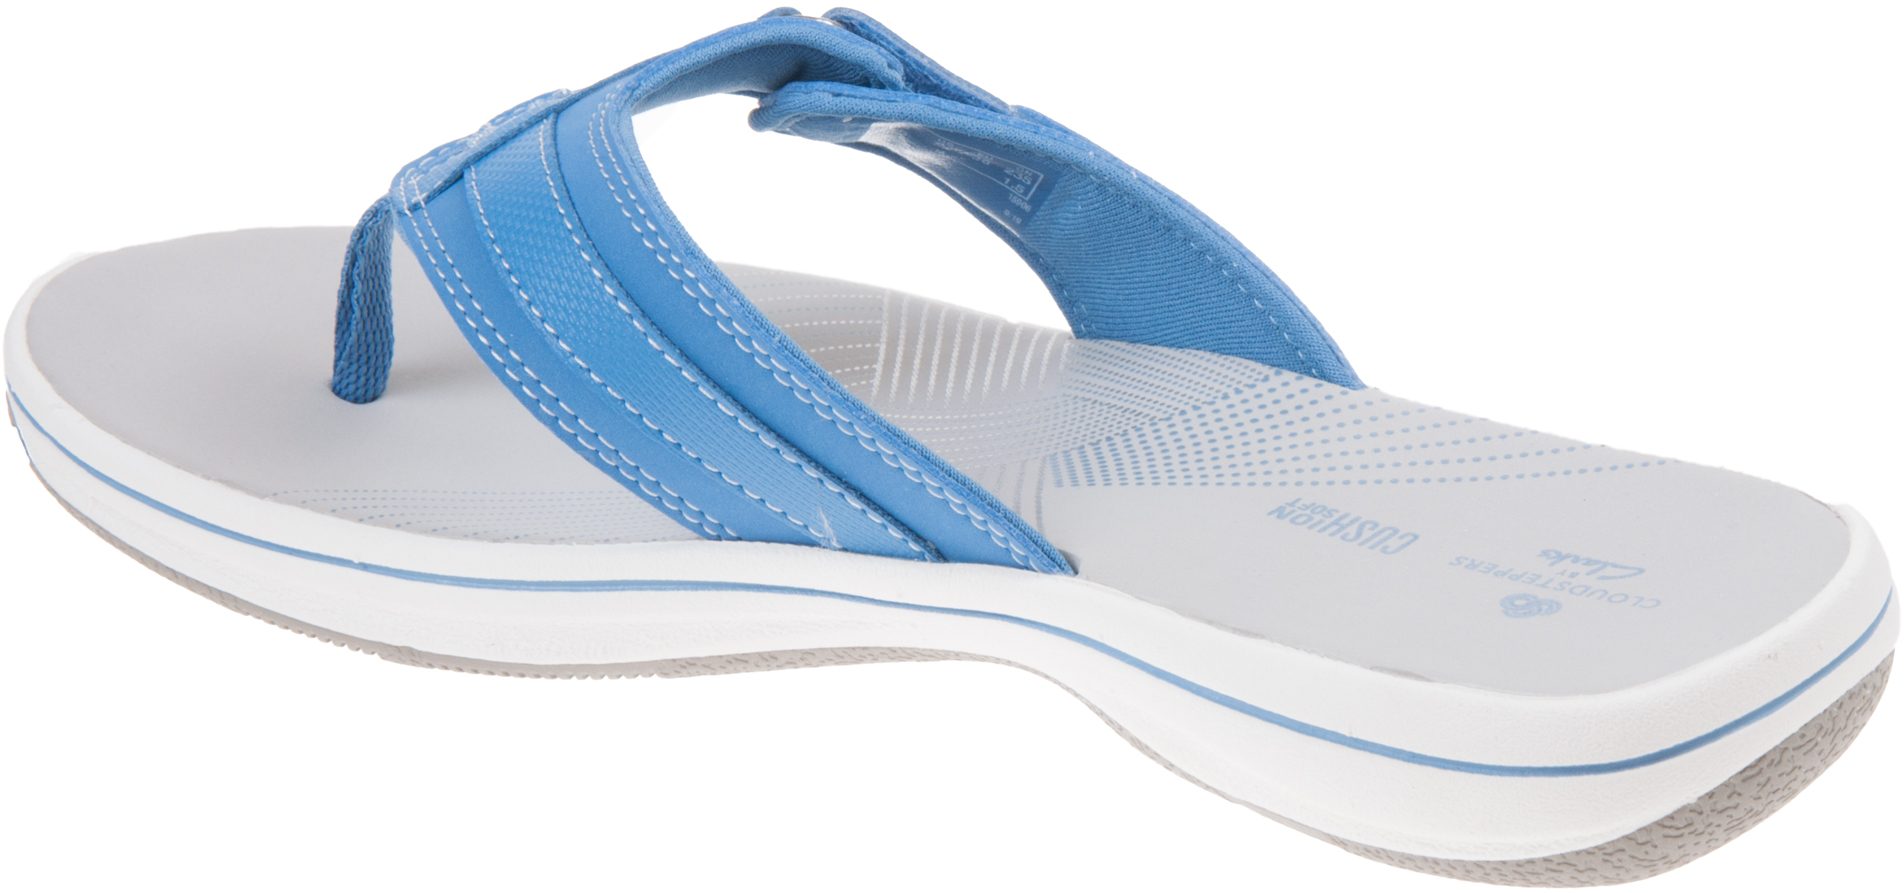 Clarks Brinkley Sea Blue 26148899 - Toe Post Sandals - Humphries Shoes